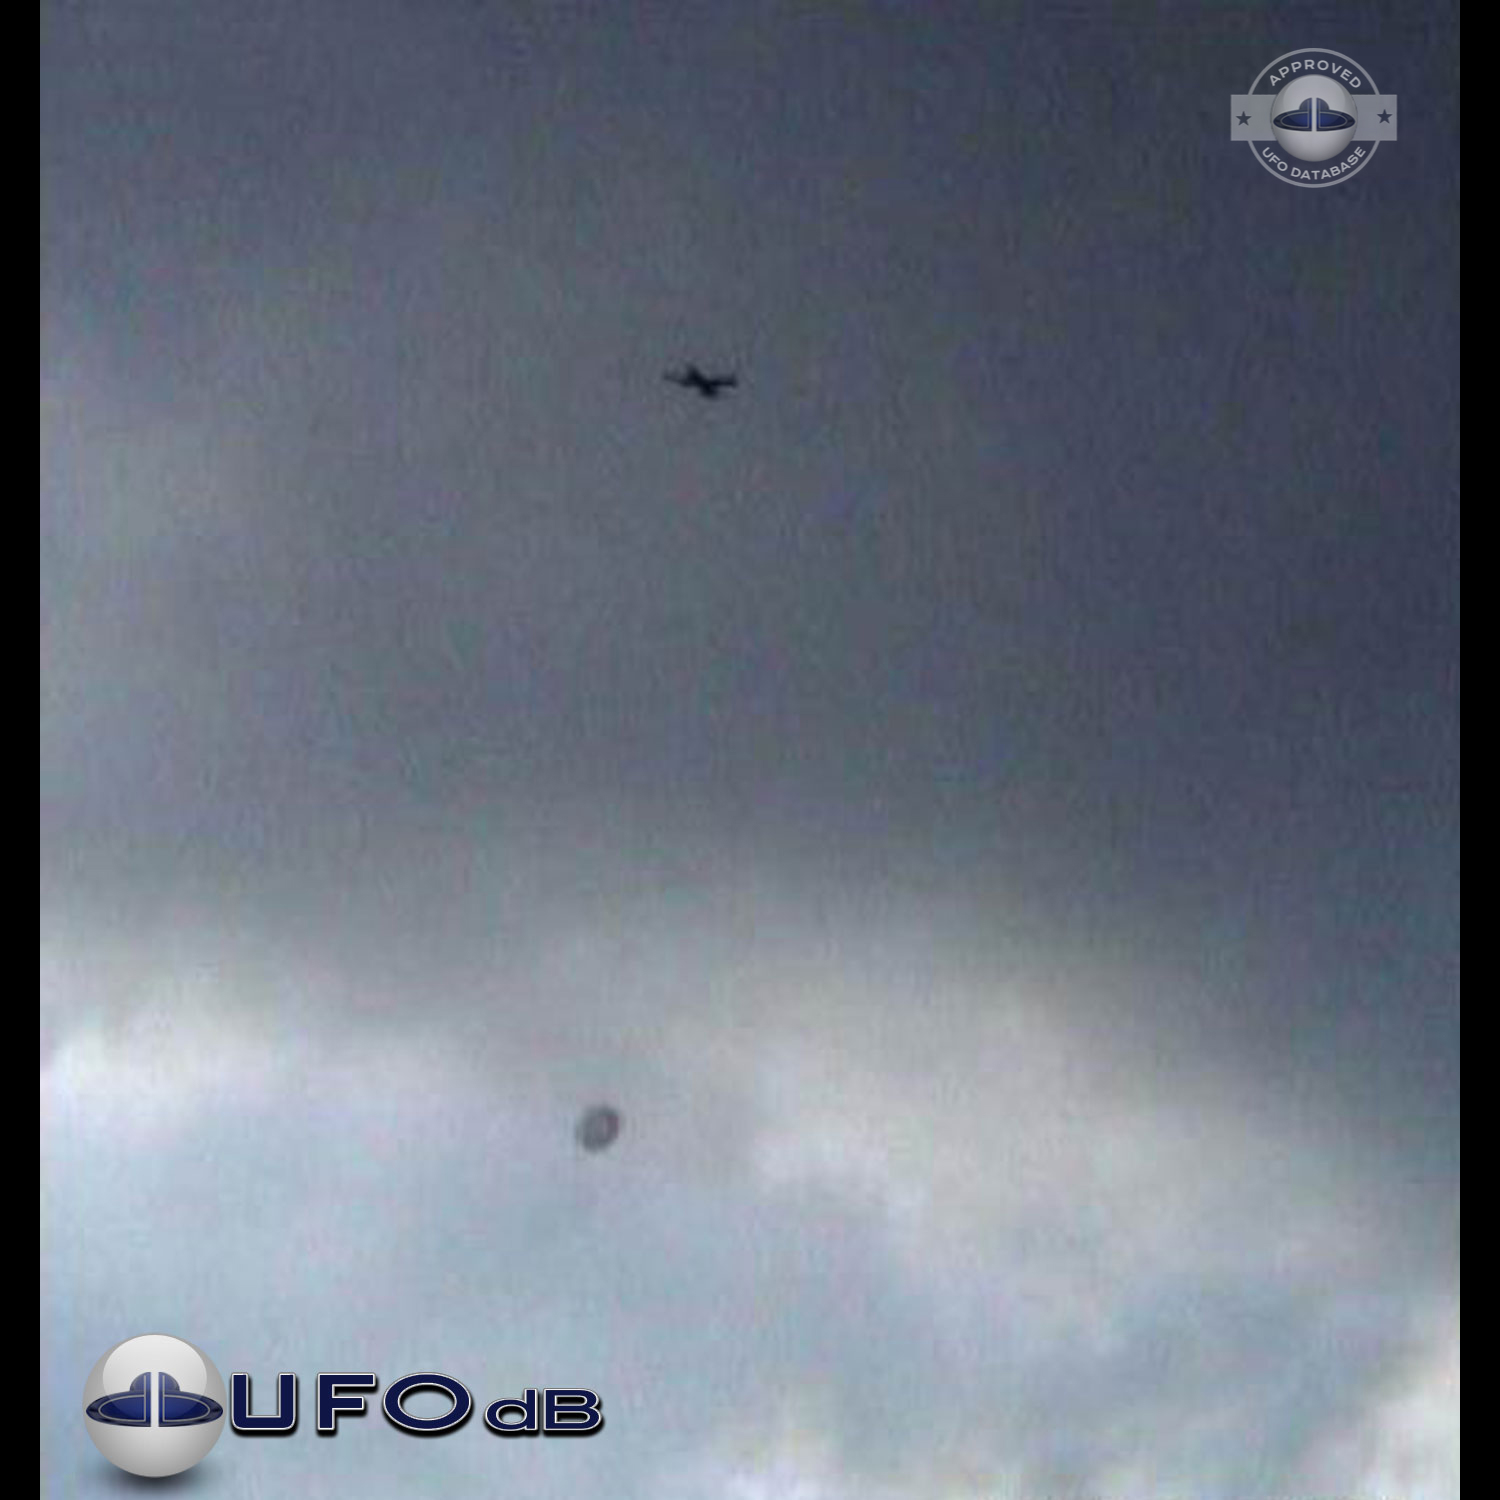 UFO Pictures UFOdB.com - UFO near airplane in England in 2002 UFO Picture #63-1